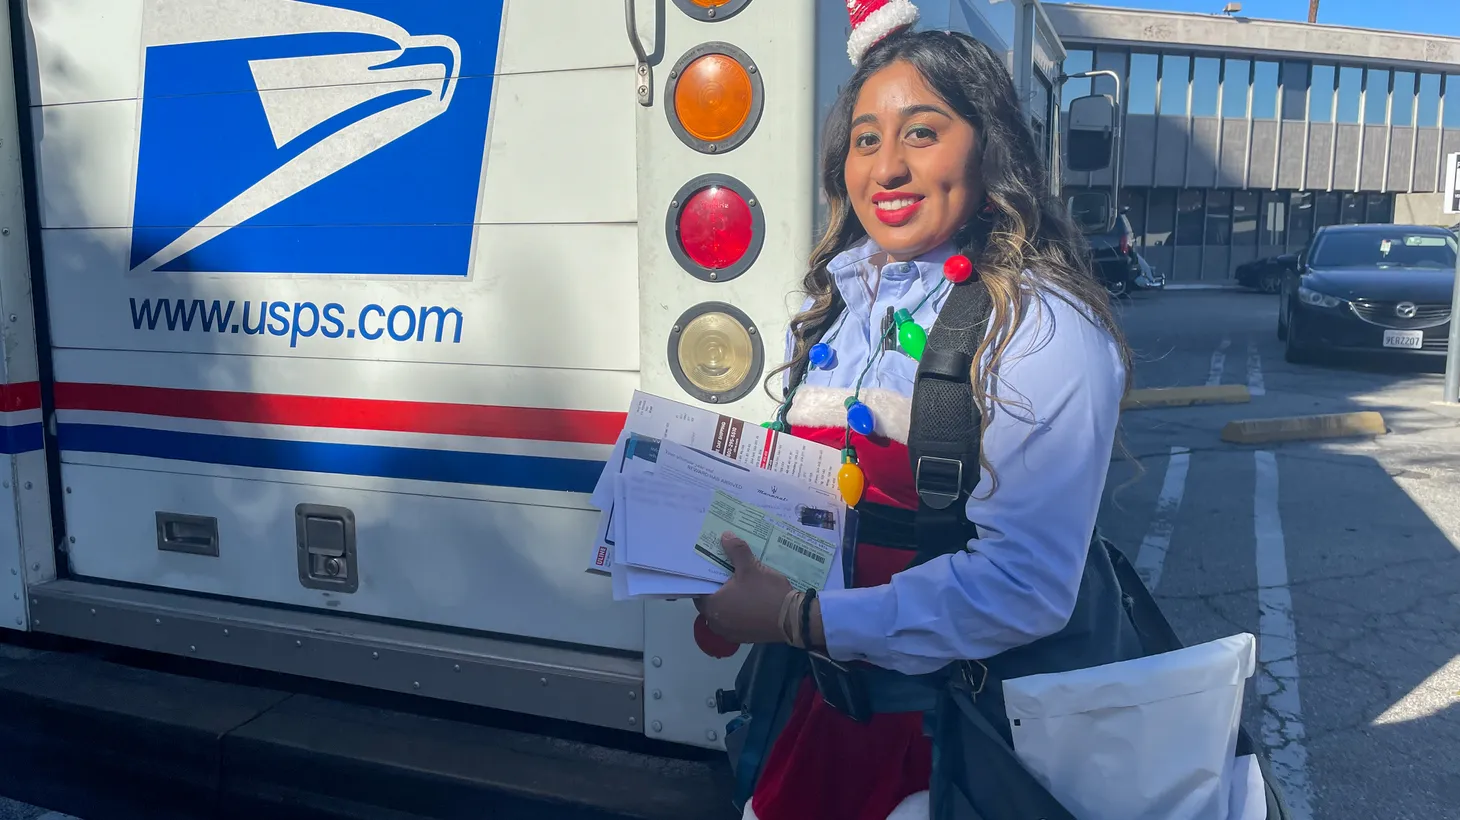 Sherman Oaks mail carrier Lesly Gonzalez works overtime during the holidays to meet higher gifting demands.